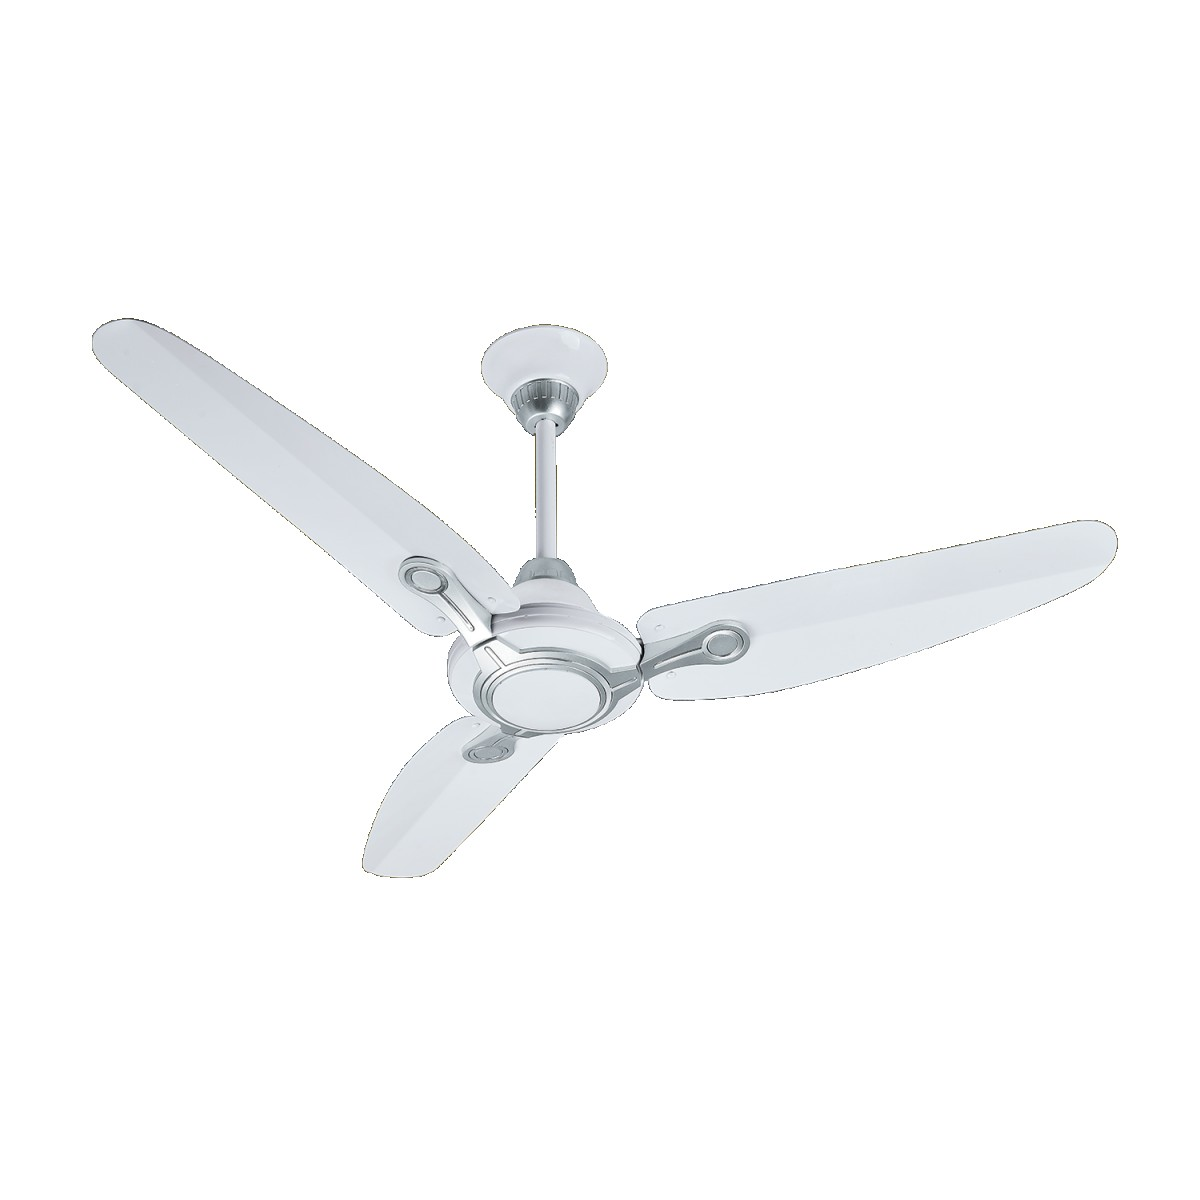 GFC Ceiling Fans 56 Inch Superior Model High quality paint for superior finishing. Brand Warranty